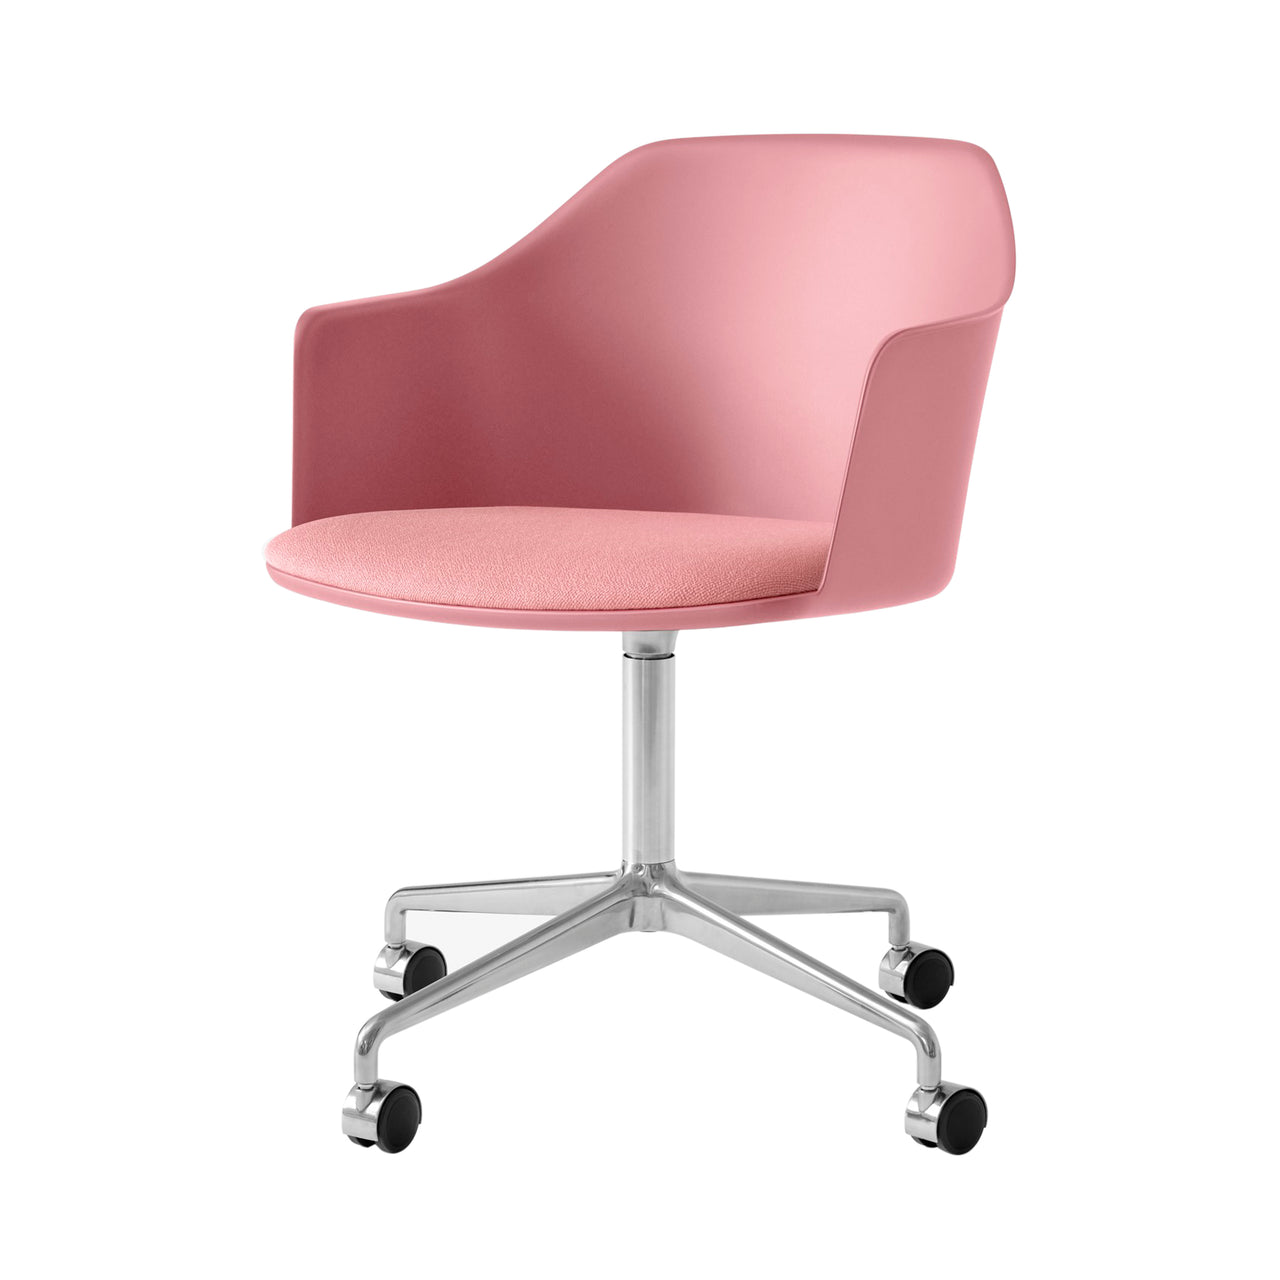 Rely Armchair HW49: Polished Aluminum + Soft Pink